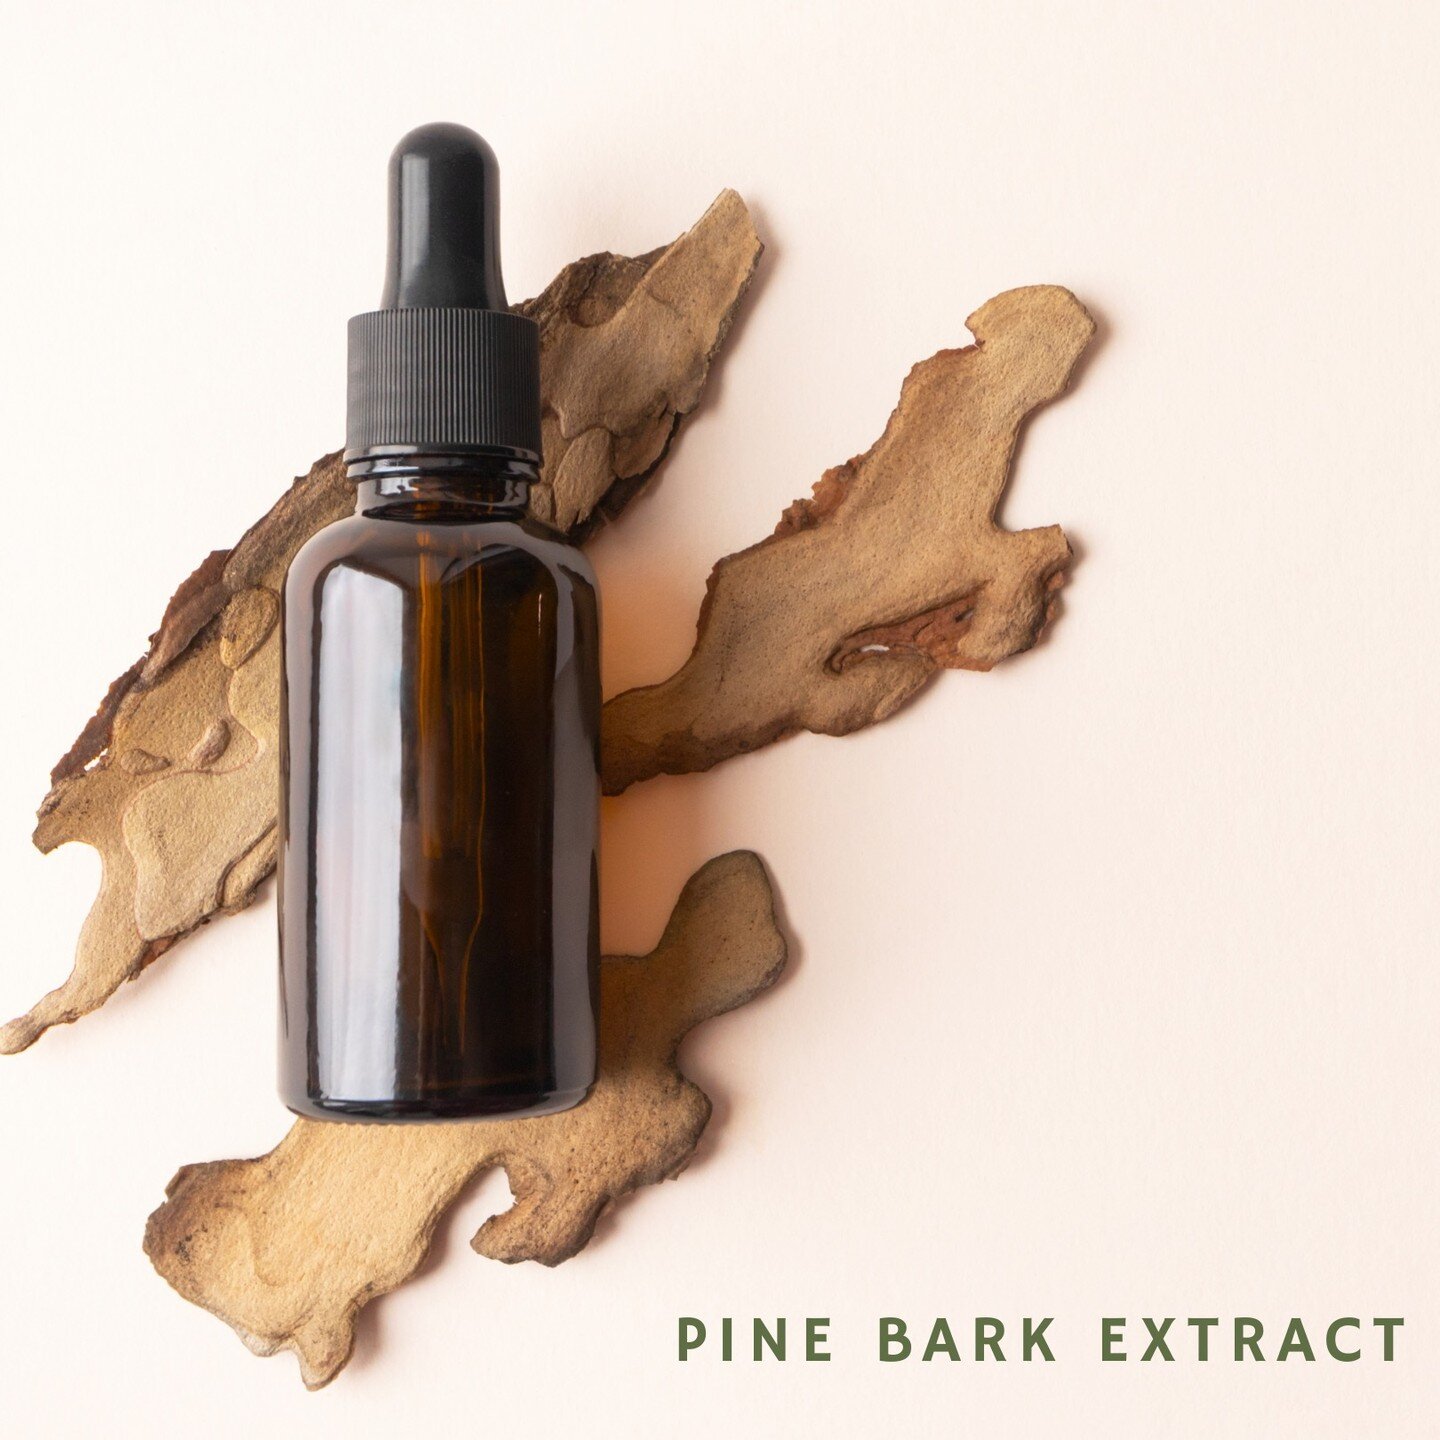 Pine Bark Extract can dramatically reduce free radicals in the skin. These molecules can age your skin, and pine bark extract can help regenerate and duplicate your skin cells. You&rsquo;ll often see this extract in lotions and moisturizers. Pine bar